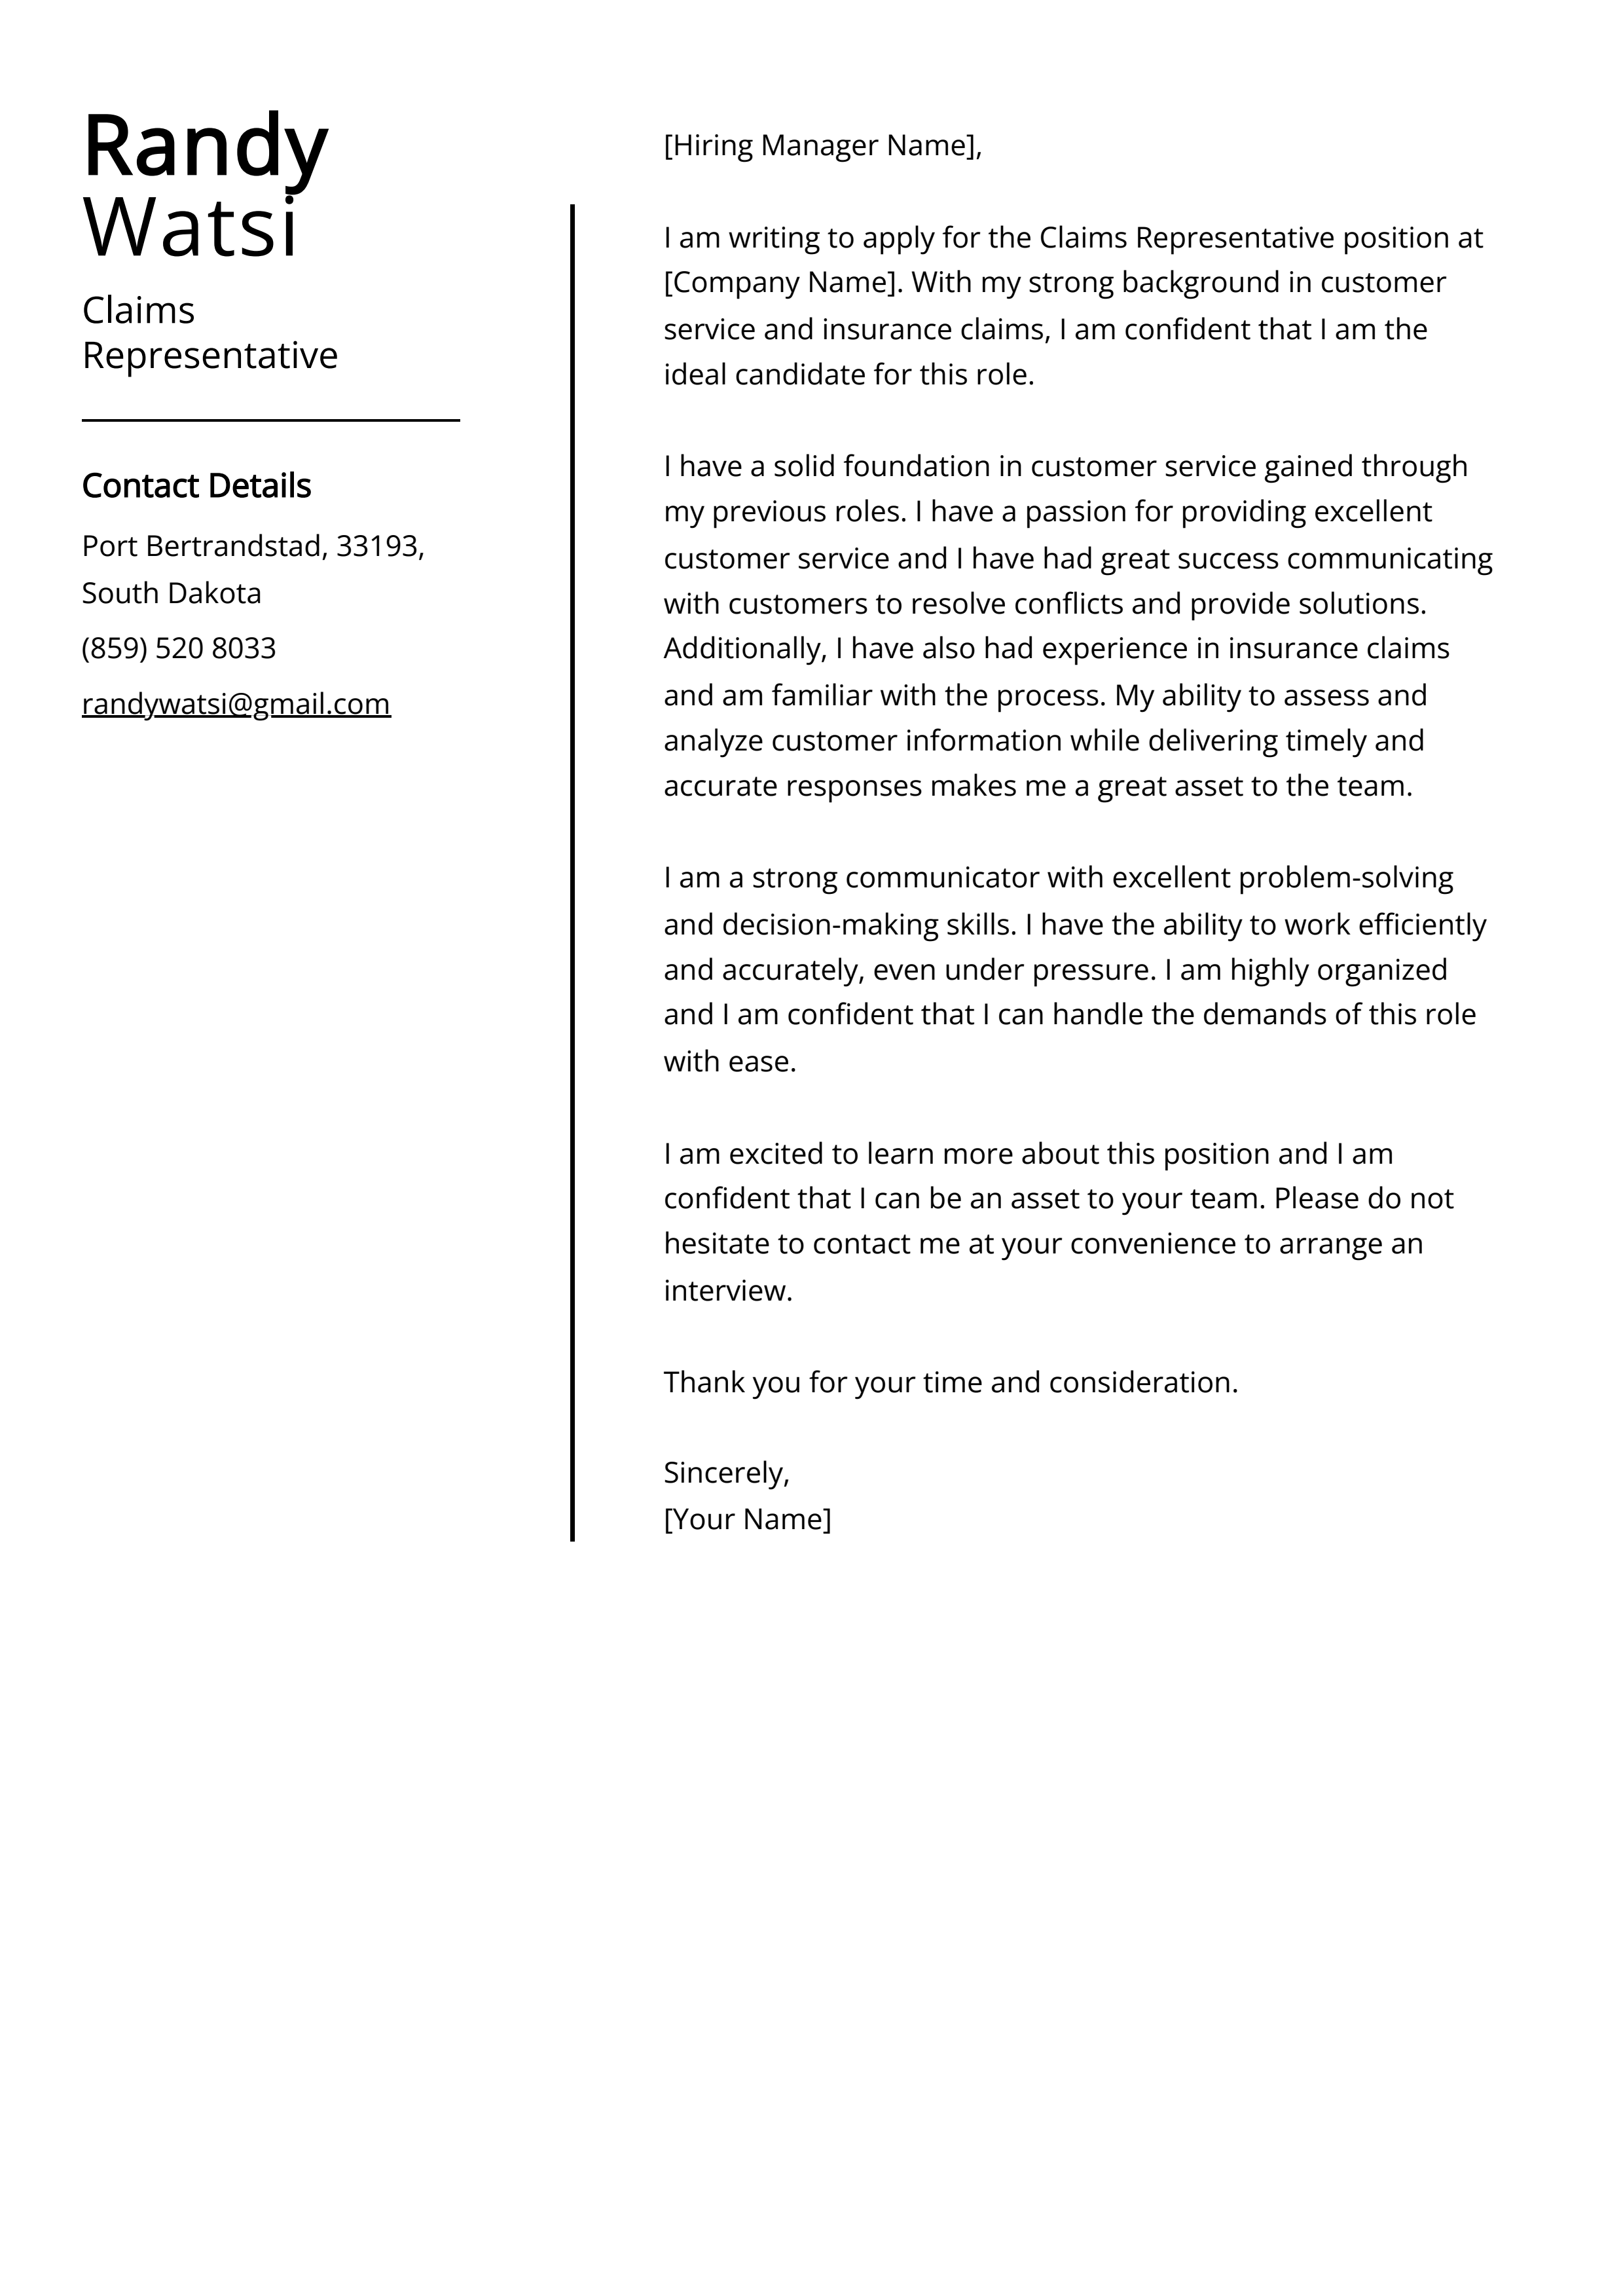 Claims Representative Cover Letter Example